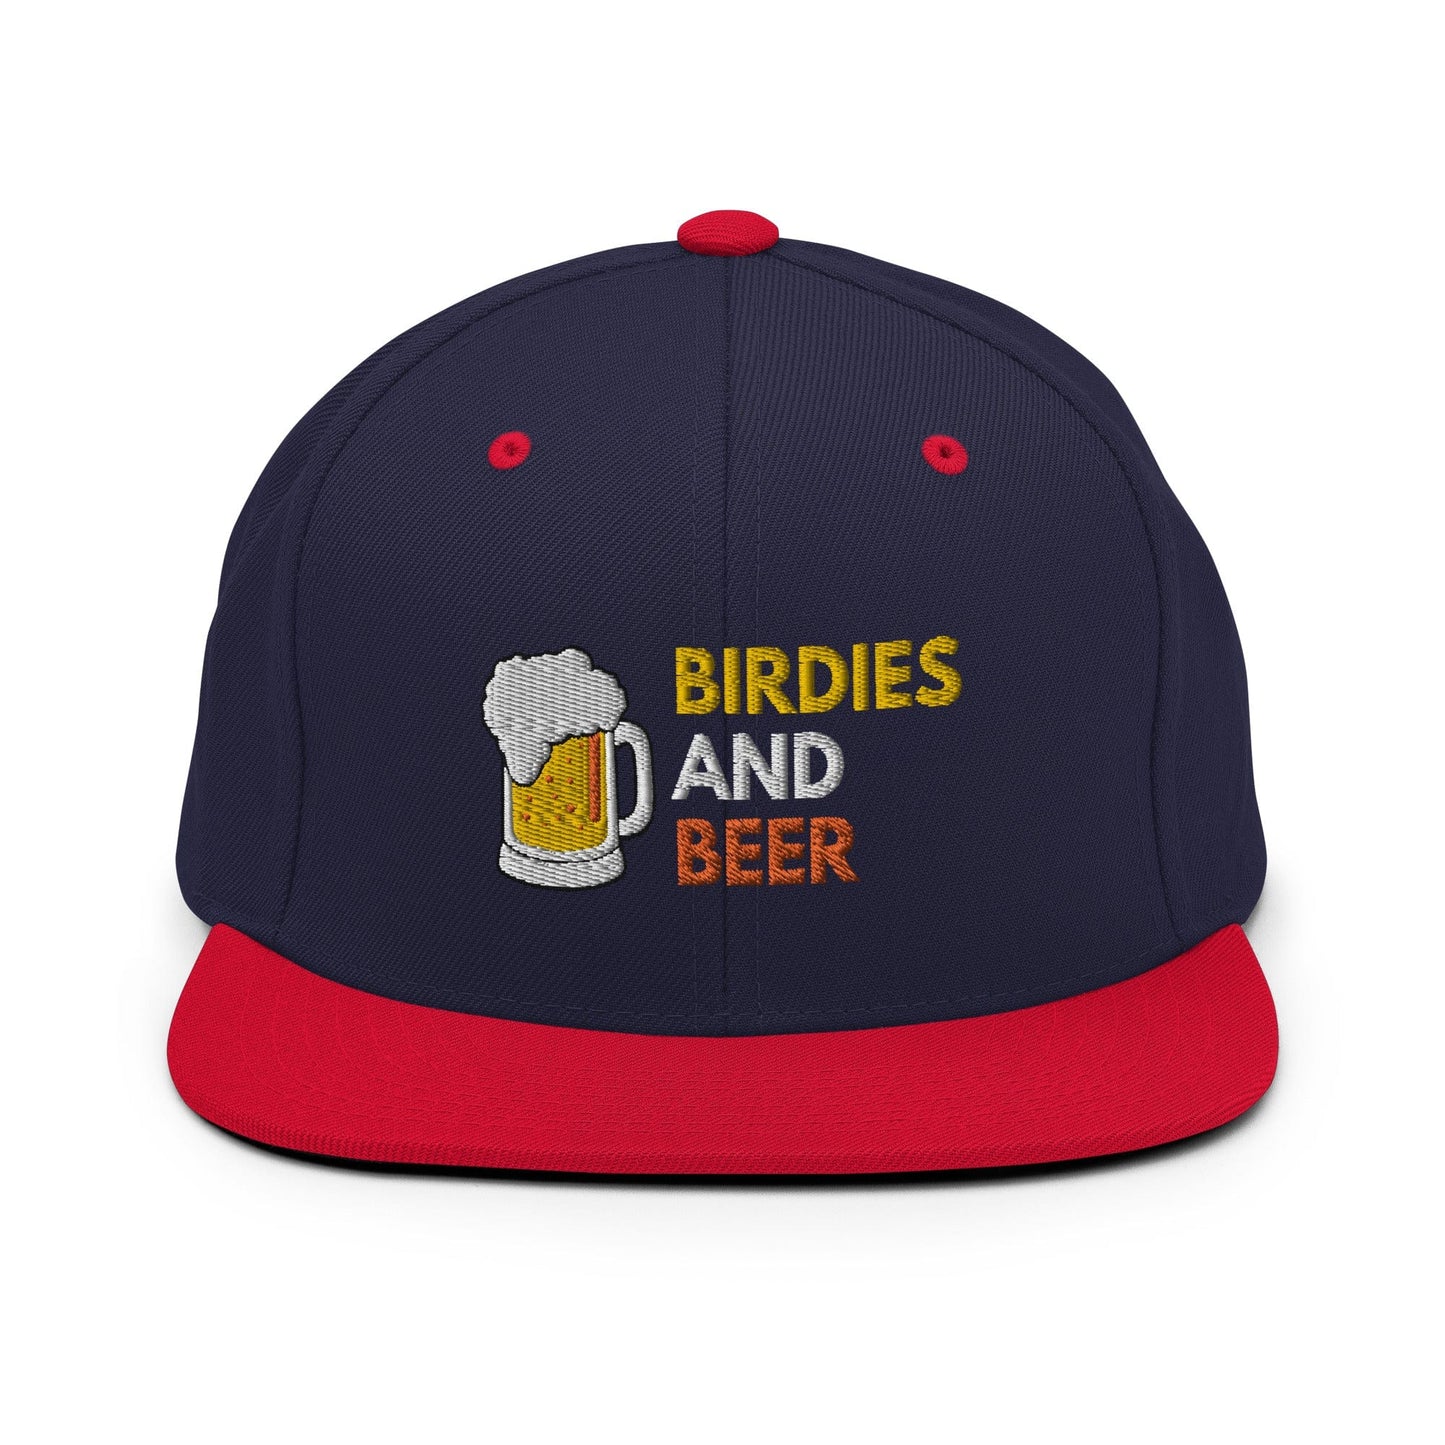 Funny Golfer Gifts  Snapback Hat Navy/ Red Birdies and Beer Snapback Hat